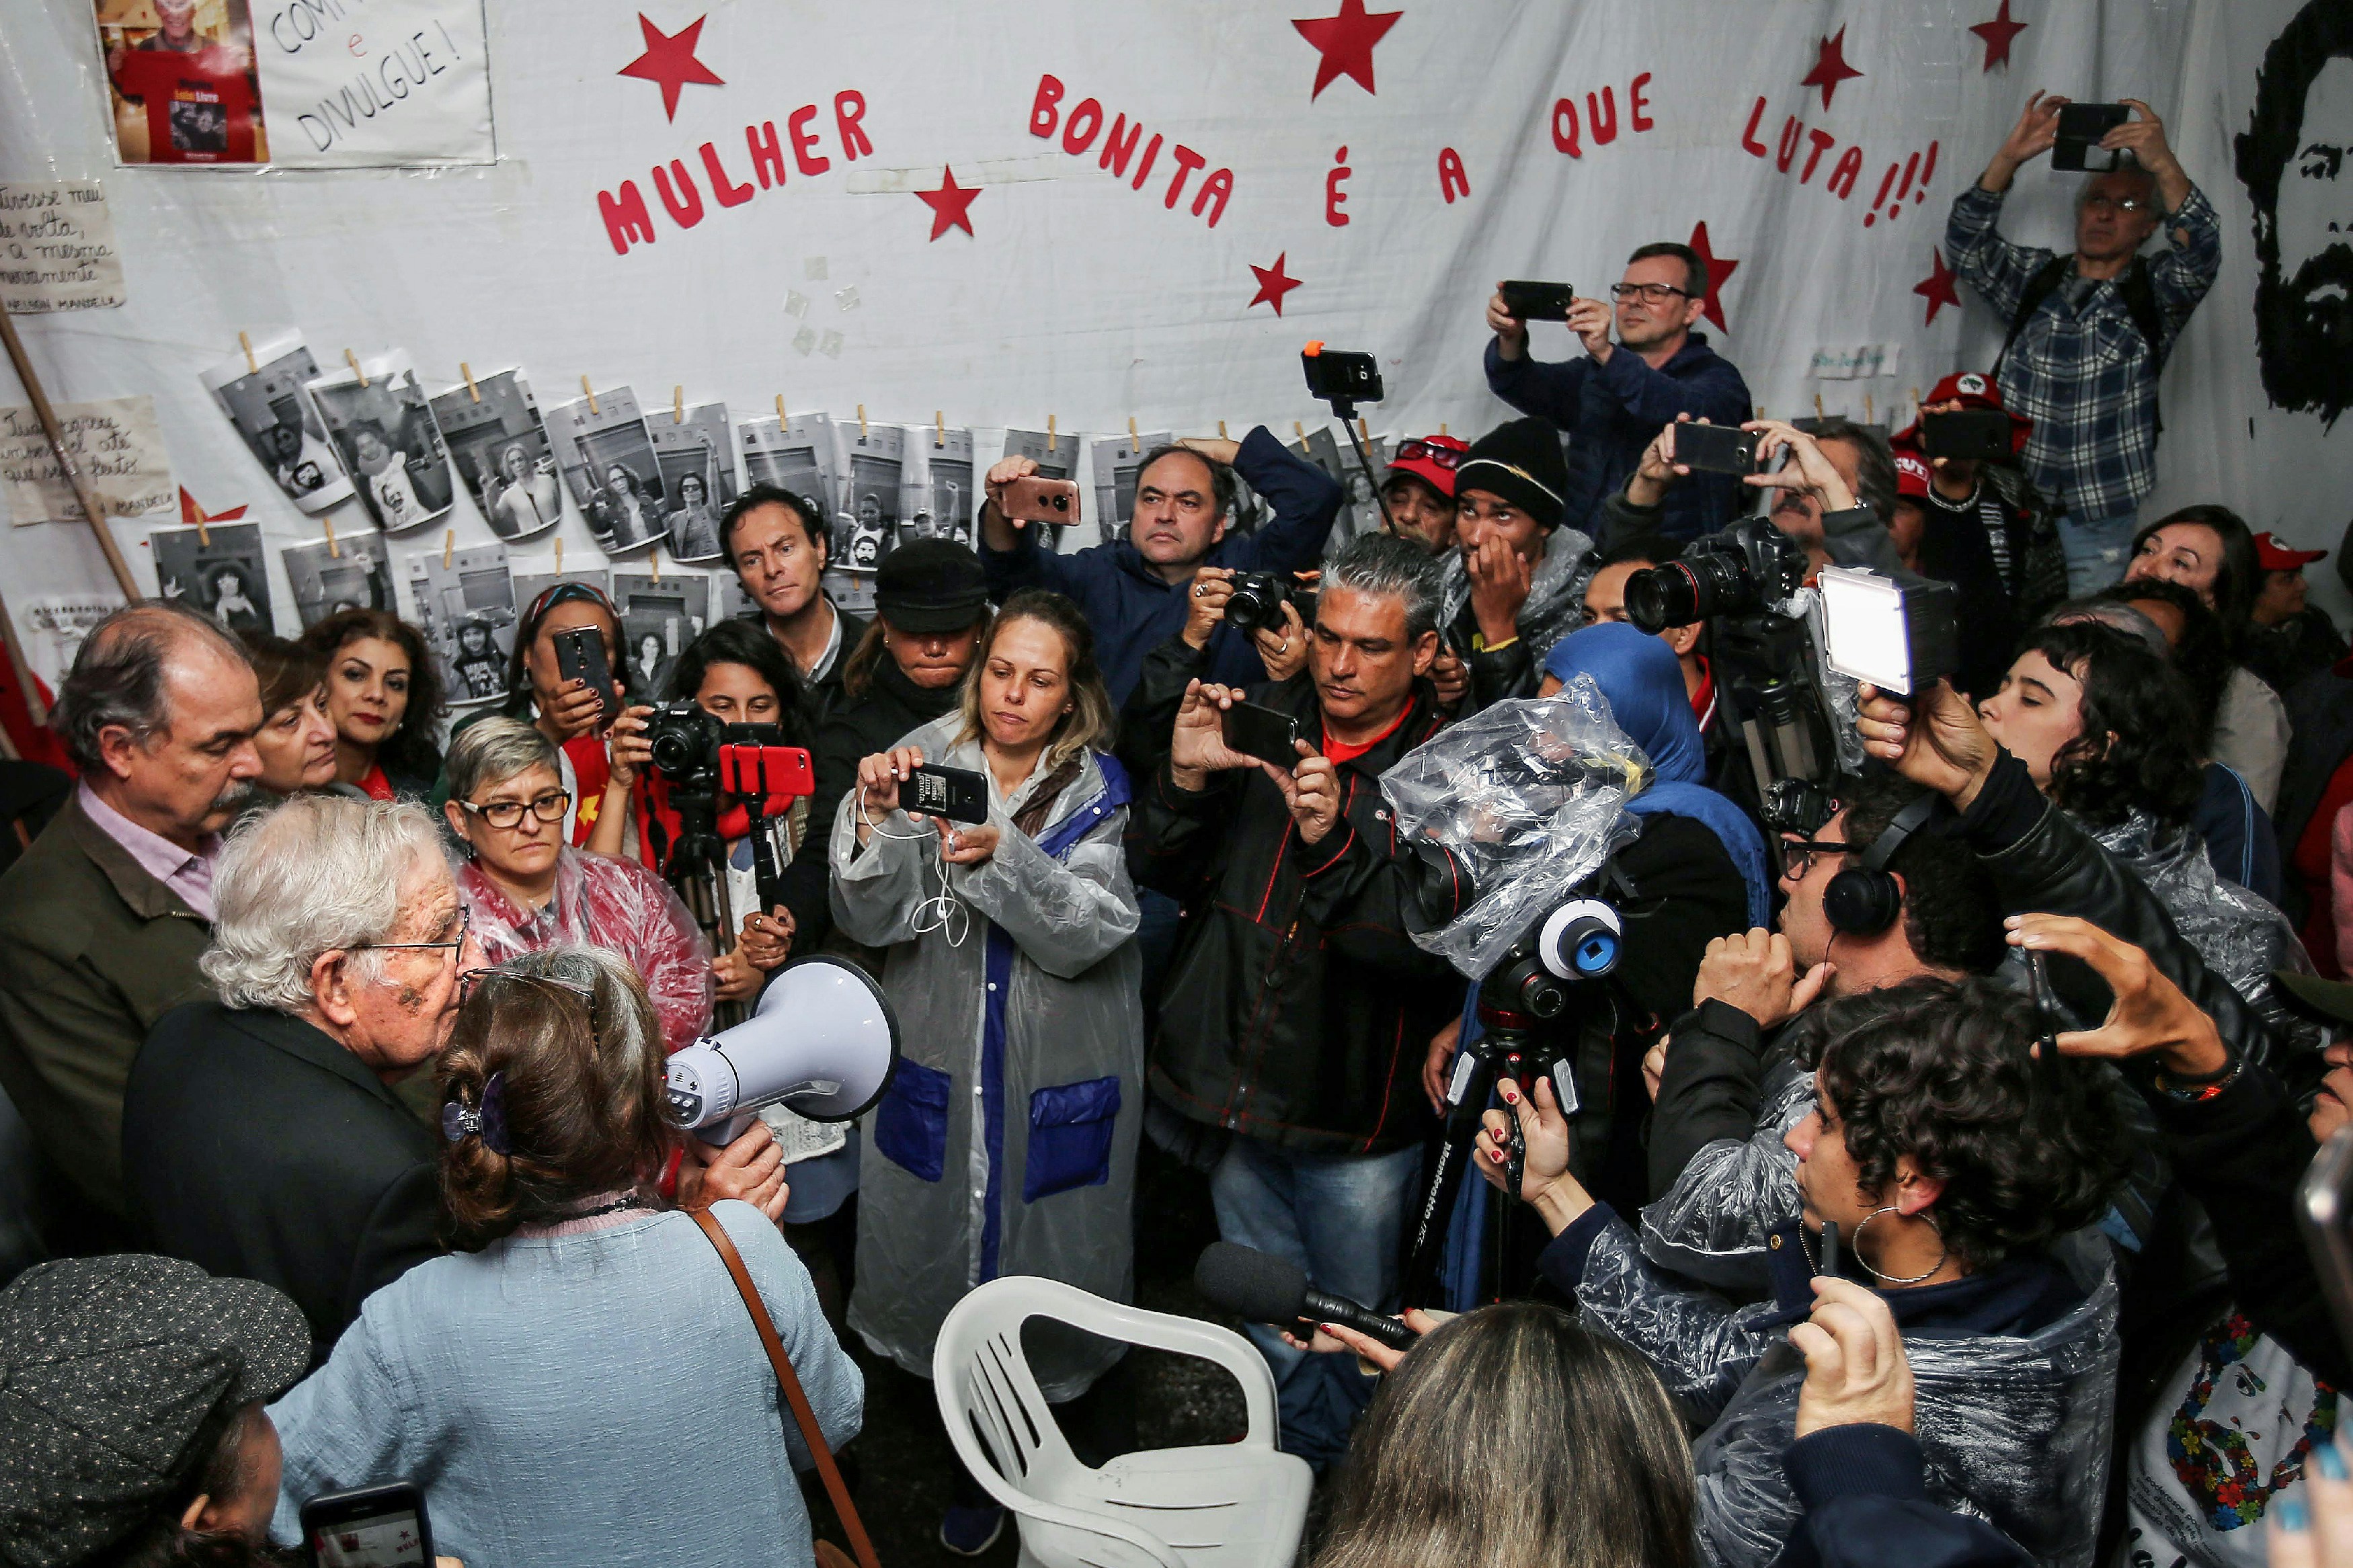 US linguist and political activist Noam Chomsky (R), speaks to PT militants after visiting former President Luis Inacio Lula da Silva, arrested for corruption in the Federal Police Superintendence in Curitiba, Brazil on September 20, 2018. (Photo by Heuler Andrey / AFP)        (Photo credit should read HEULER ANDREY/AFP/Getty Images)